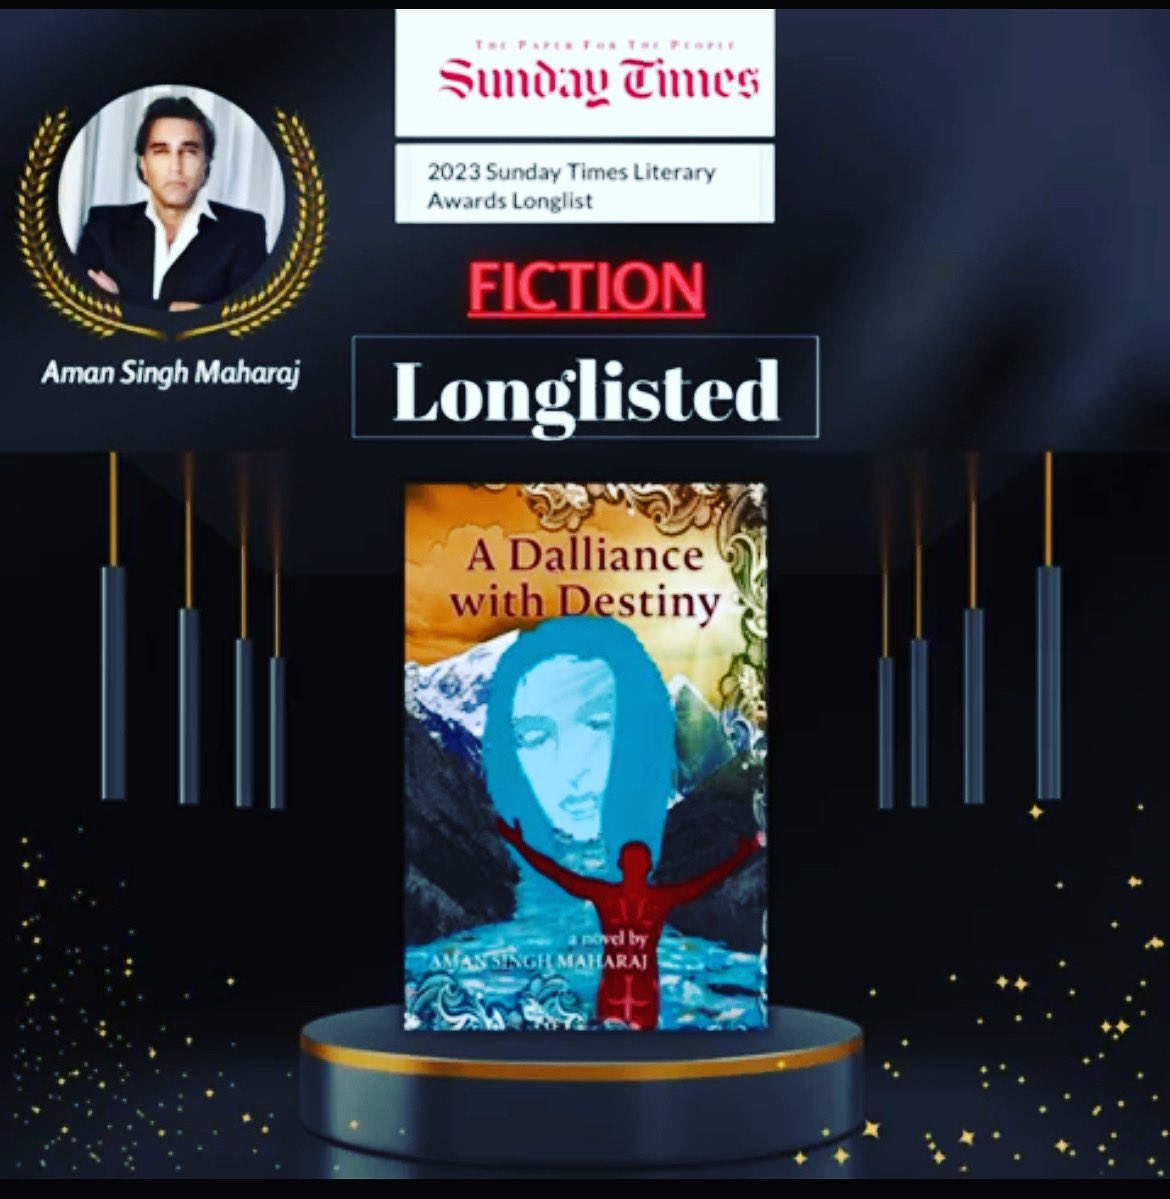 #bignews 

Delighted at A Dalliance with Destiny Destiny (Austin Macauley, UK) by Aman Singh Maharaj being longlisted for the esteemed Sunday Times Literary Awards, South Africa. 

Fingers crossed and wishing Aman the very best!

#awards #literary #literarylife #litfic